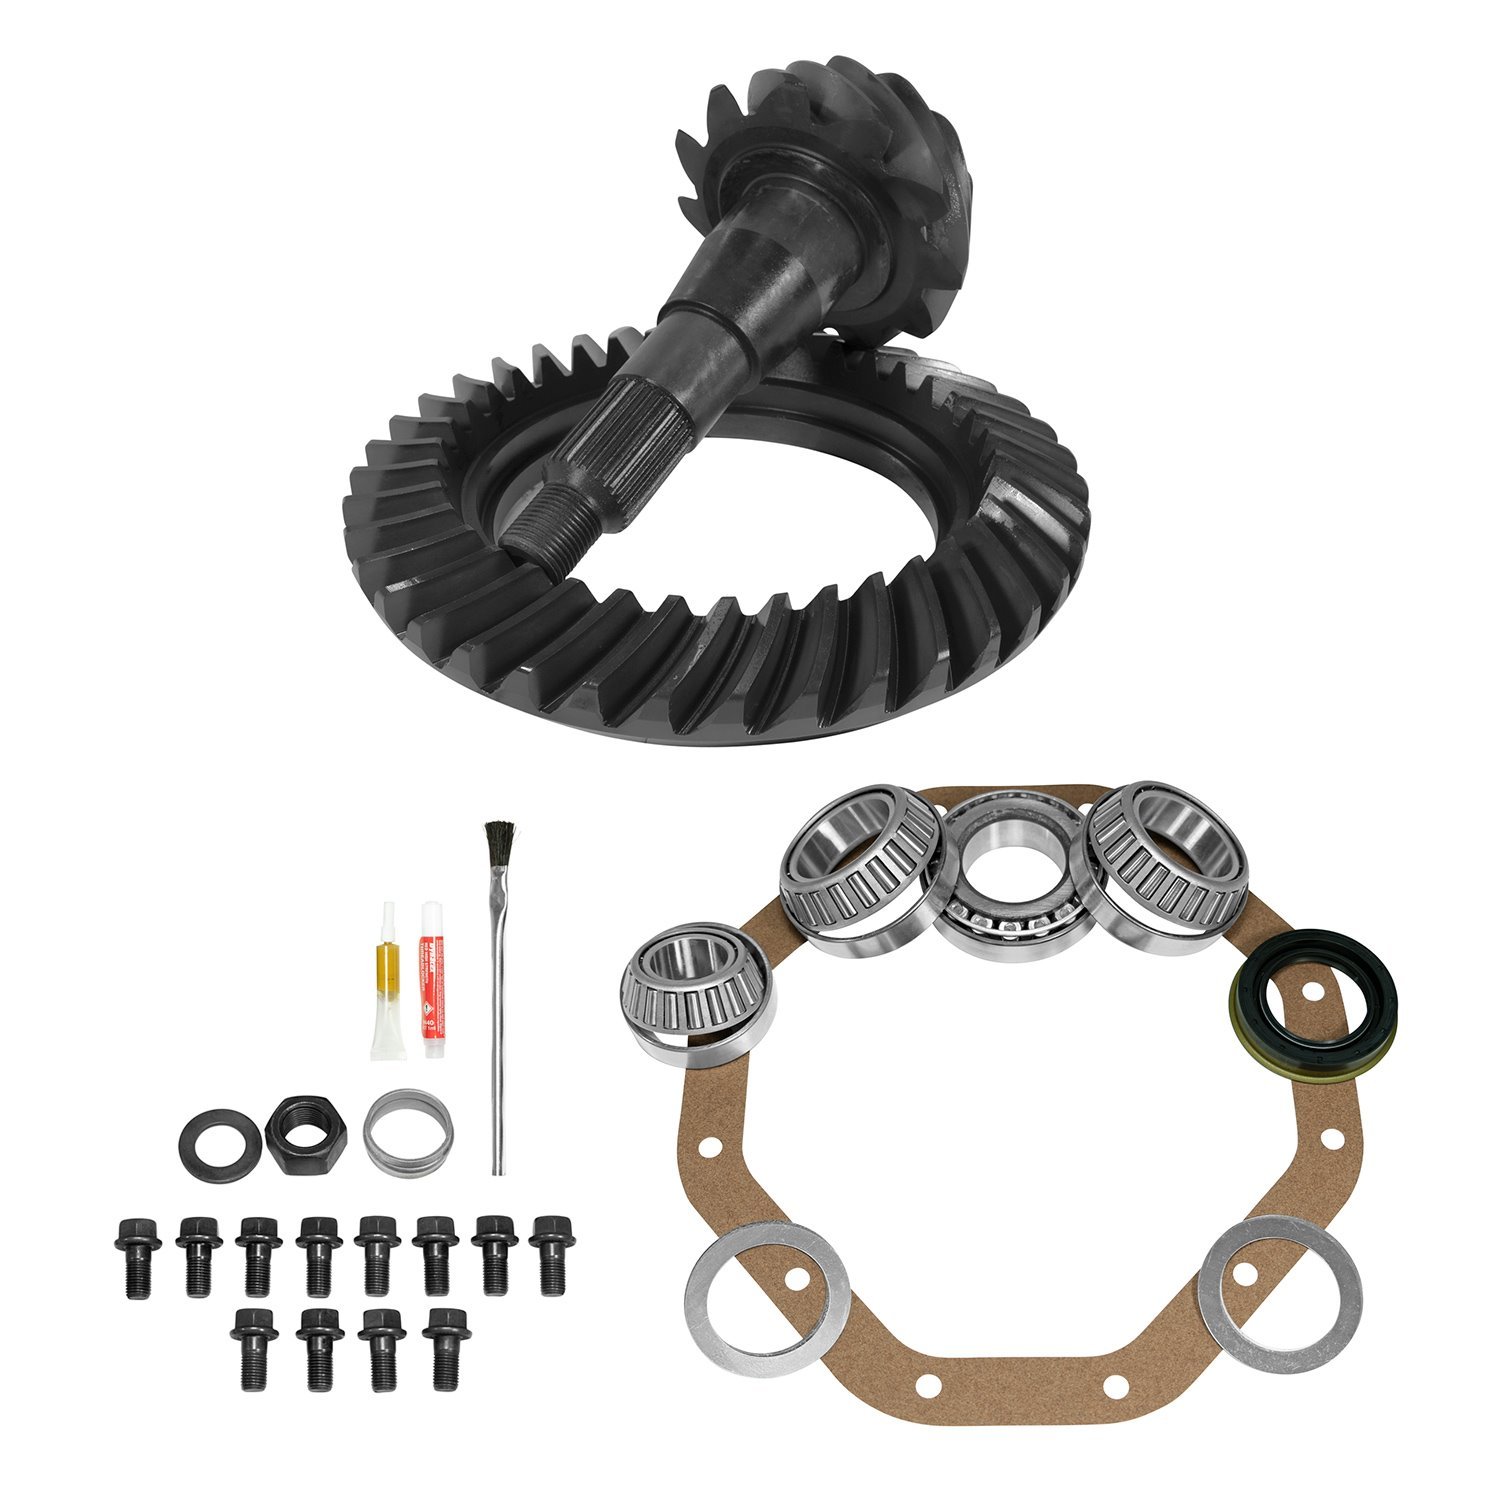 C925B1003 Ring & Pinion w/Installation Kit Bundle for 1966-2010 Chrysler Vehicles 9.25 Differentials [3.90 Ratio]